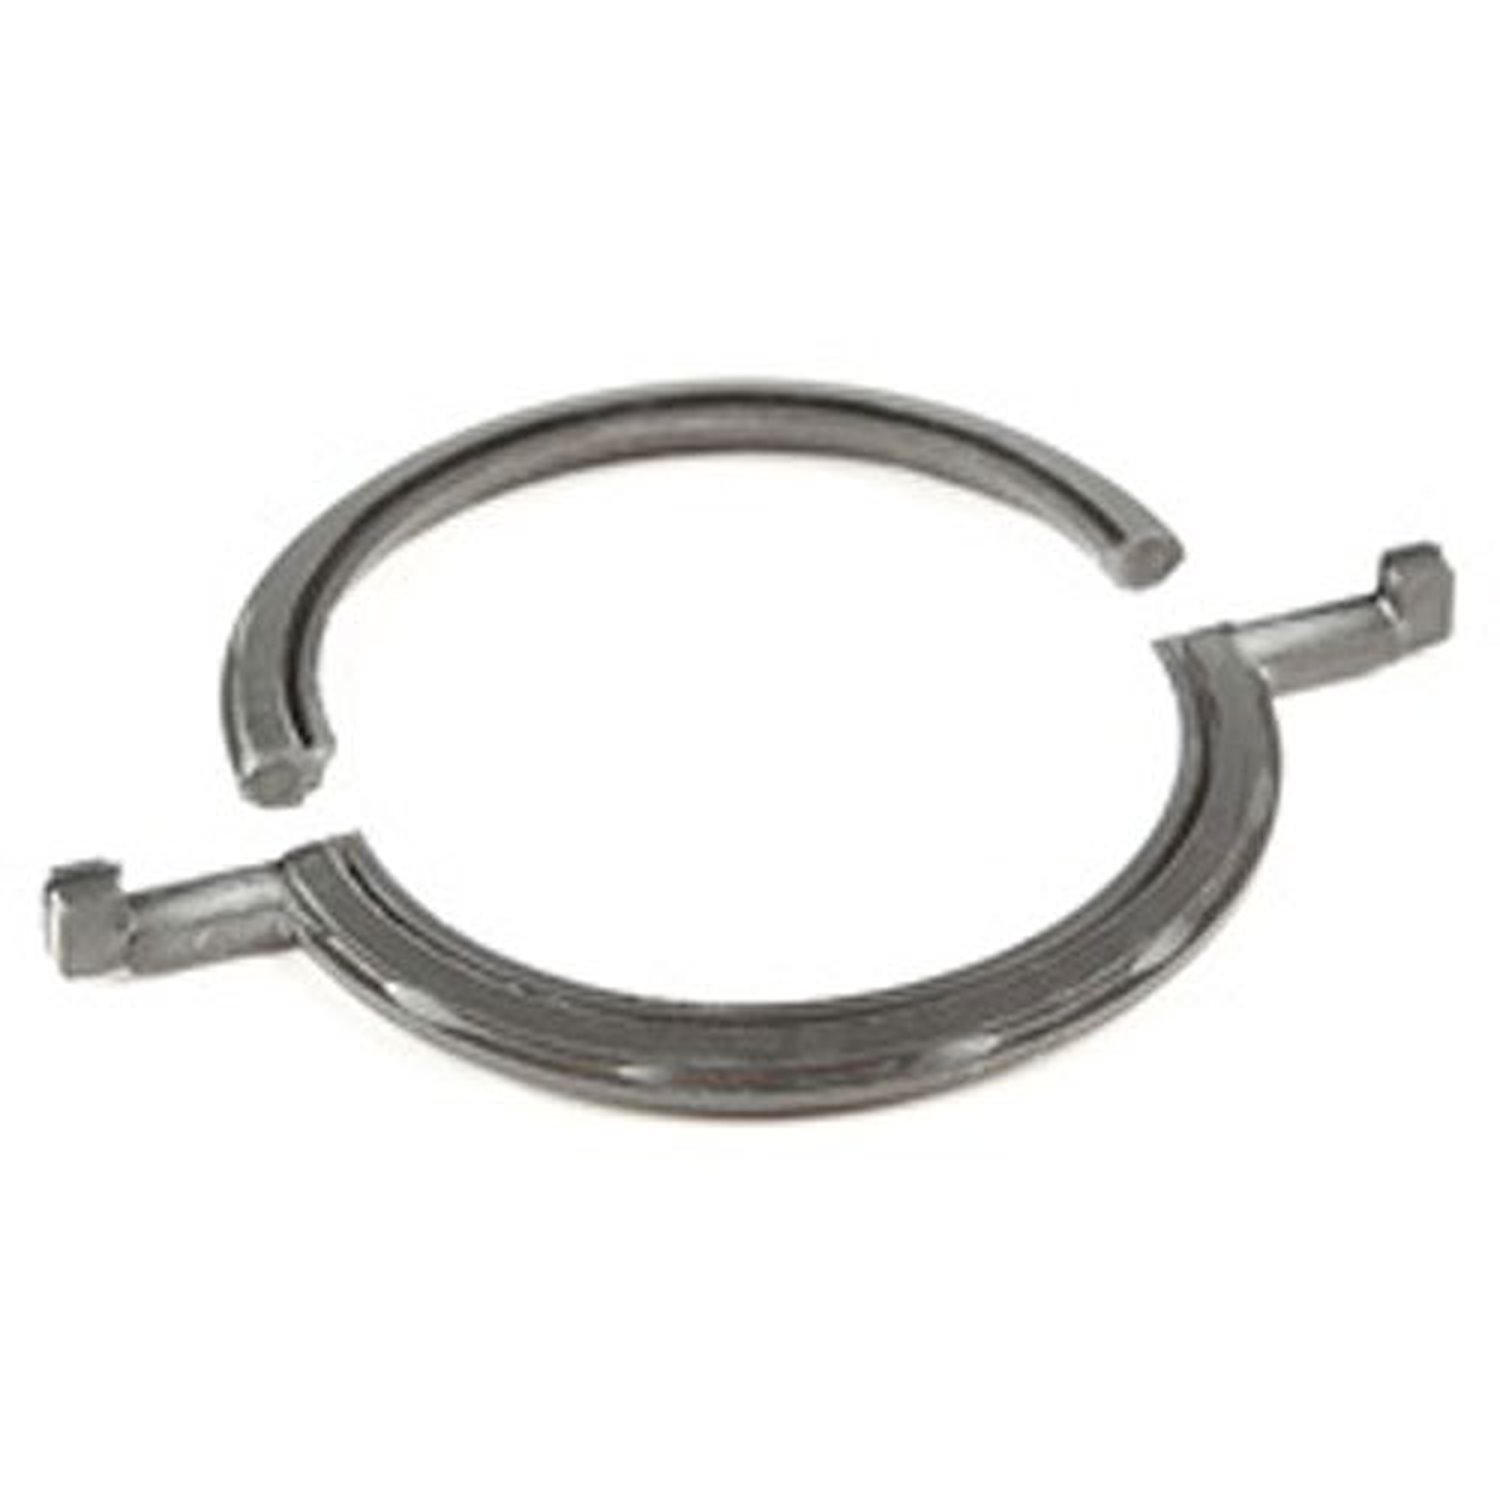 This rear crankshaft seal from Omix-ADA fits 4.2L and 3.8L engines found in 74-11 Jeep models.